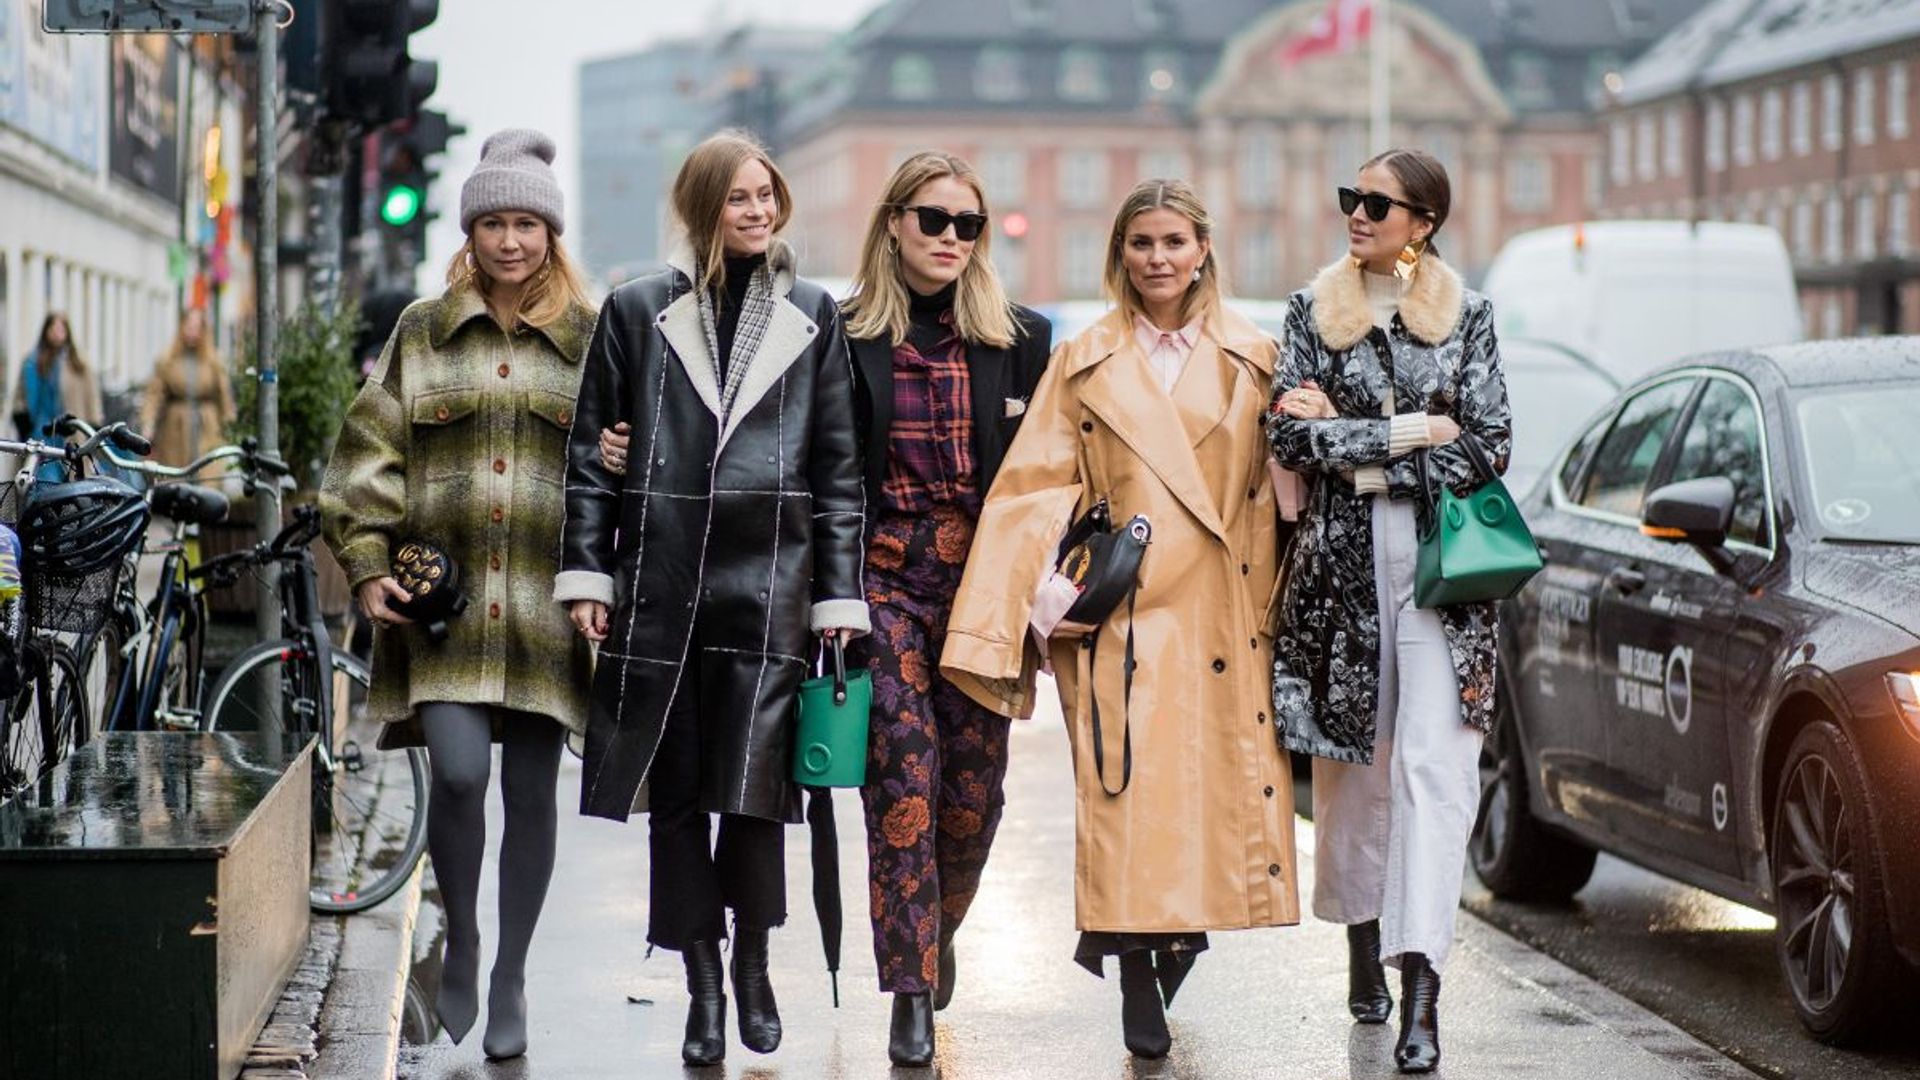 Scandinavian style essentials you need in your wardrobe, according to Pinterest